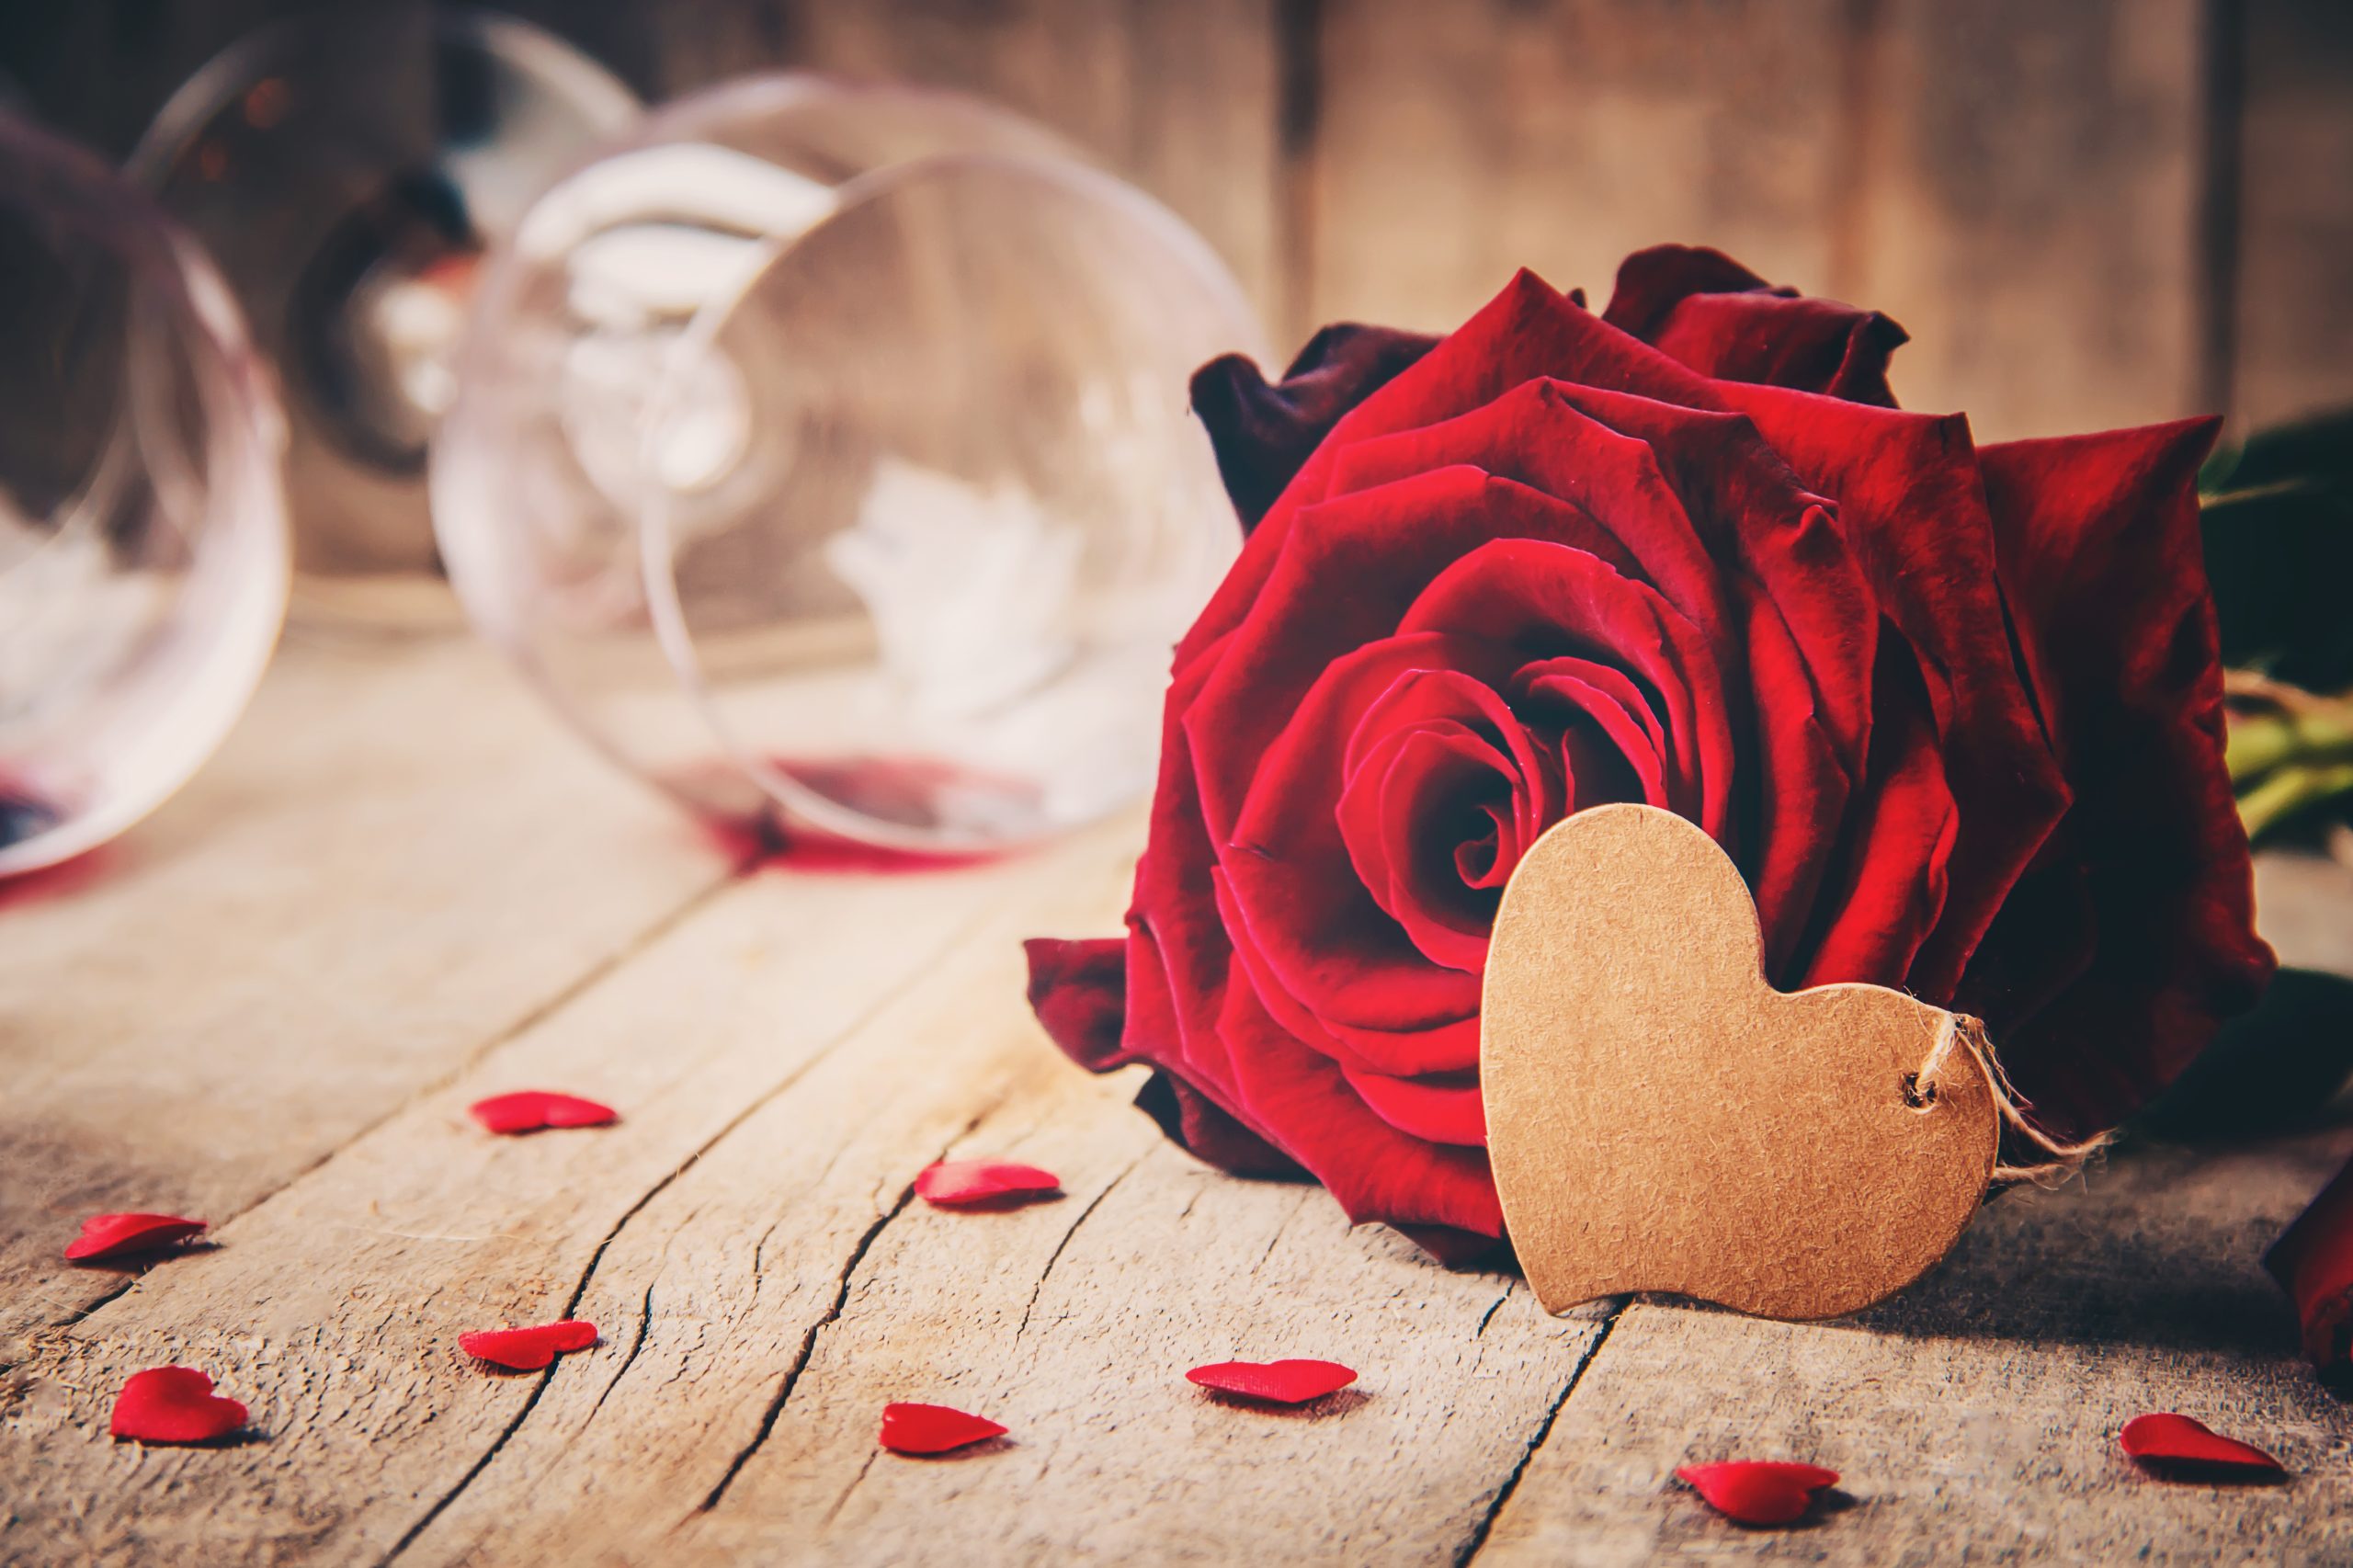 Beautiful Love Expression with Red Rose – Happy Valentine’s Day